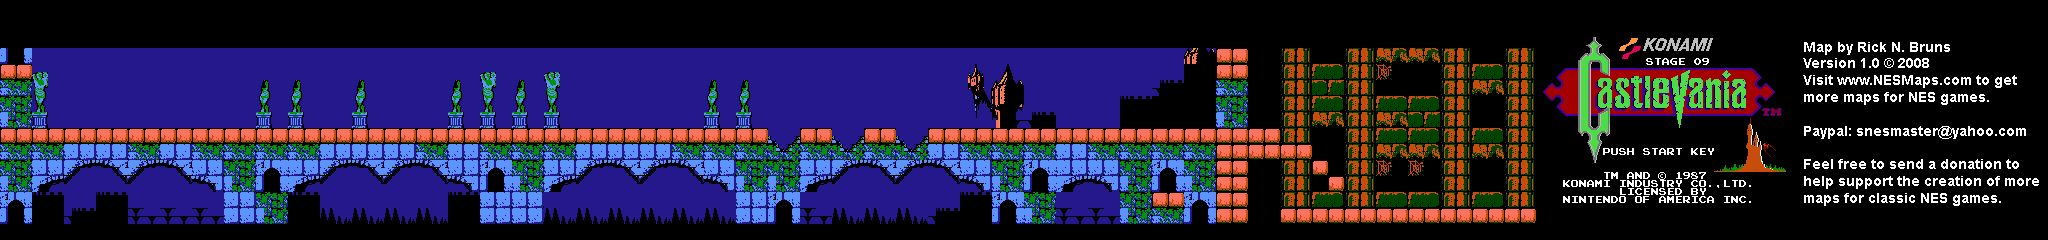 Castlevania - Stage 09 Nintendo NES Background Only Map